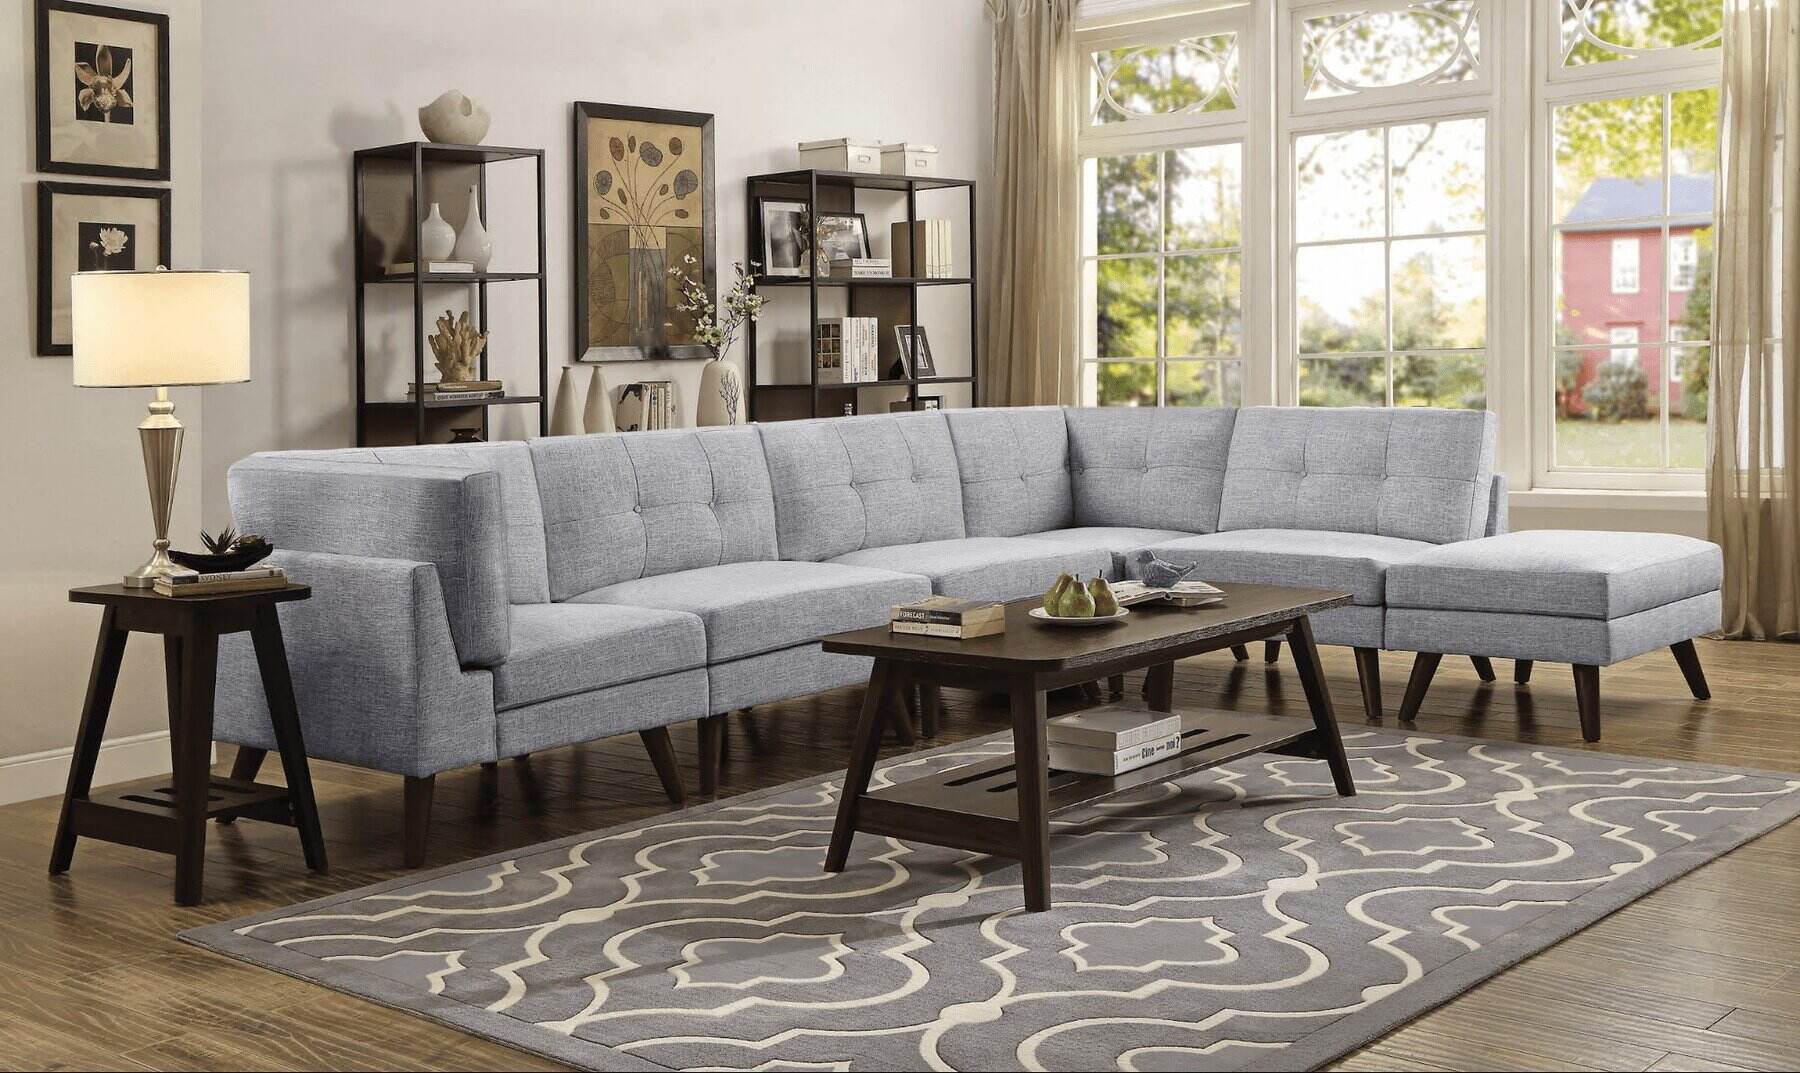 What Is The Best Style Coffee Table For A Sectional?